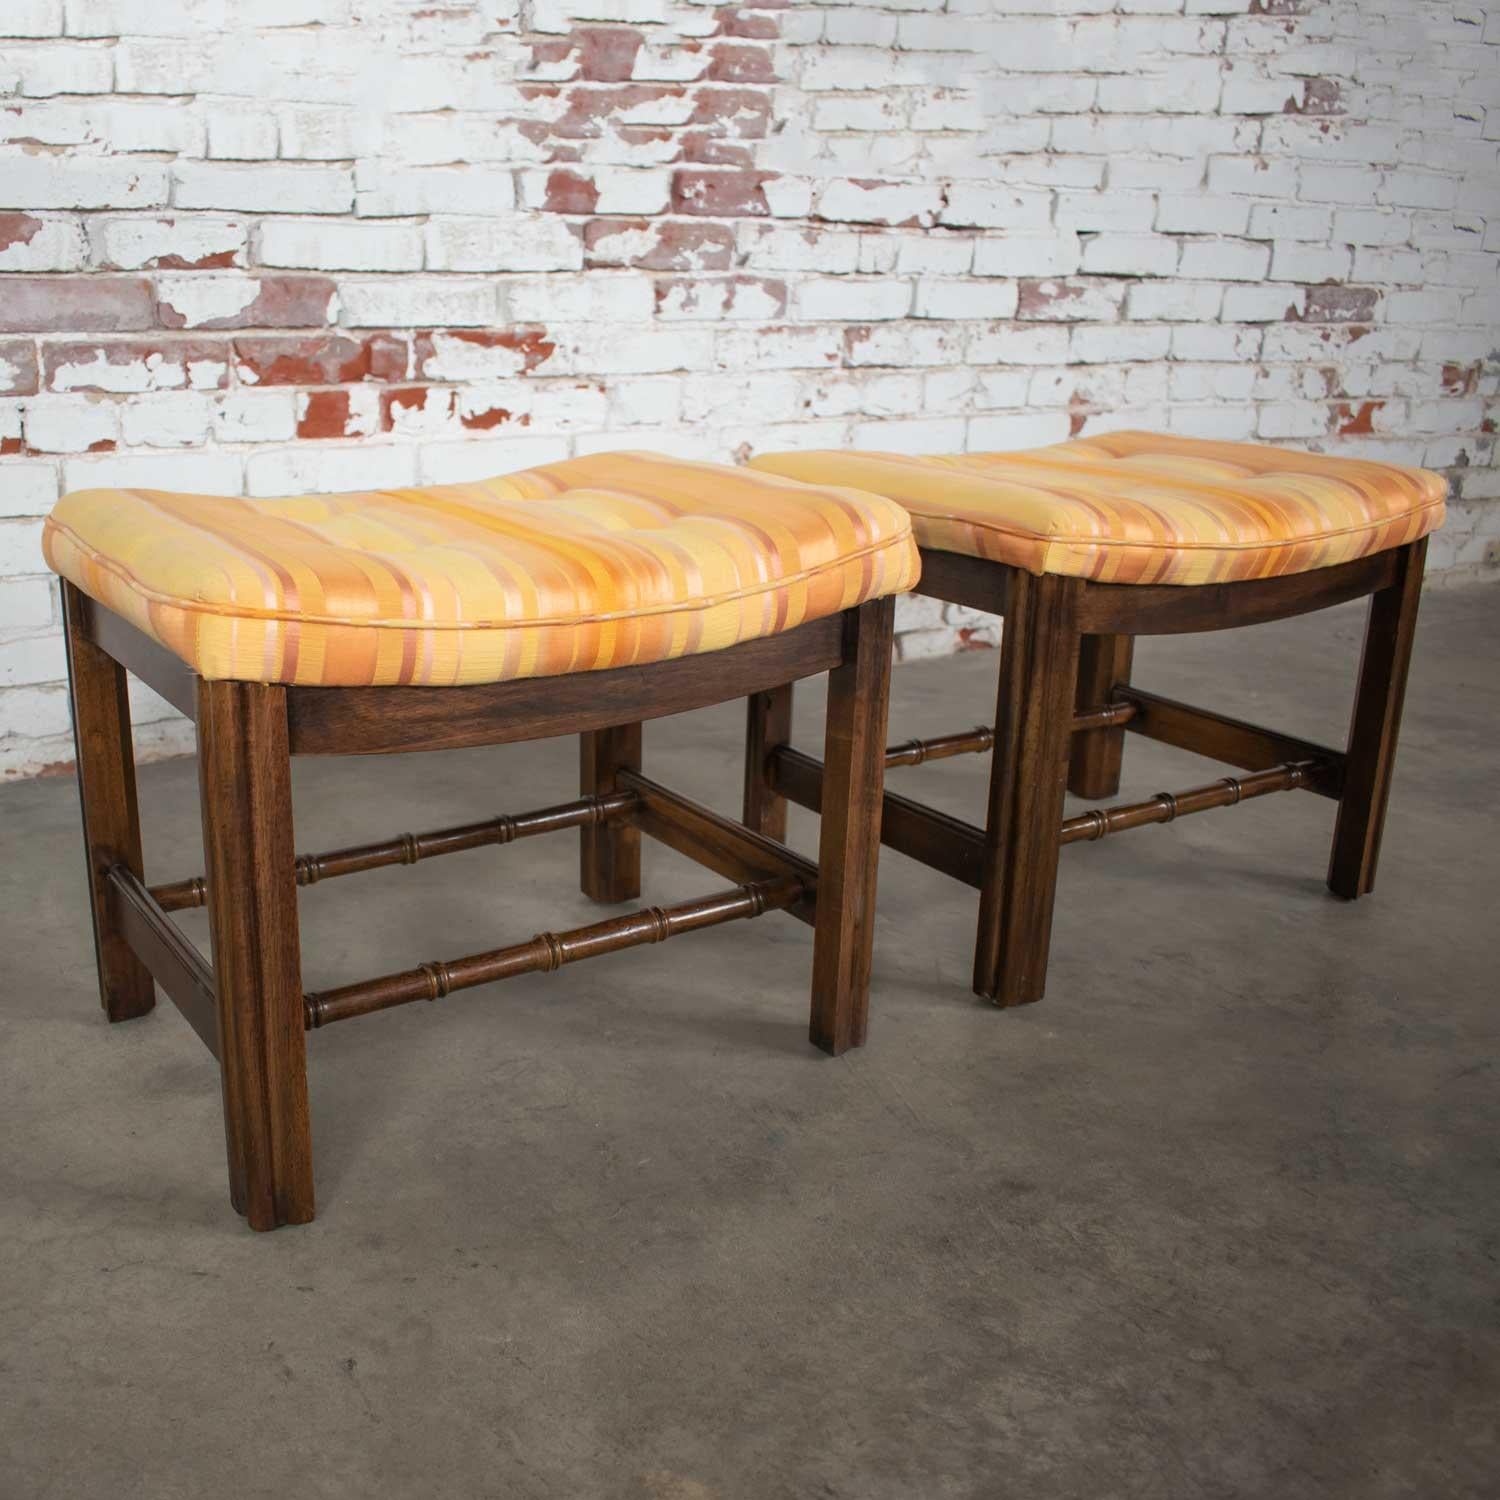 Fabric Chinese Chippendale Pair of Foot Stools in Orange and Yellow Stripe Upholstery